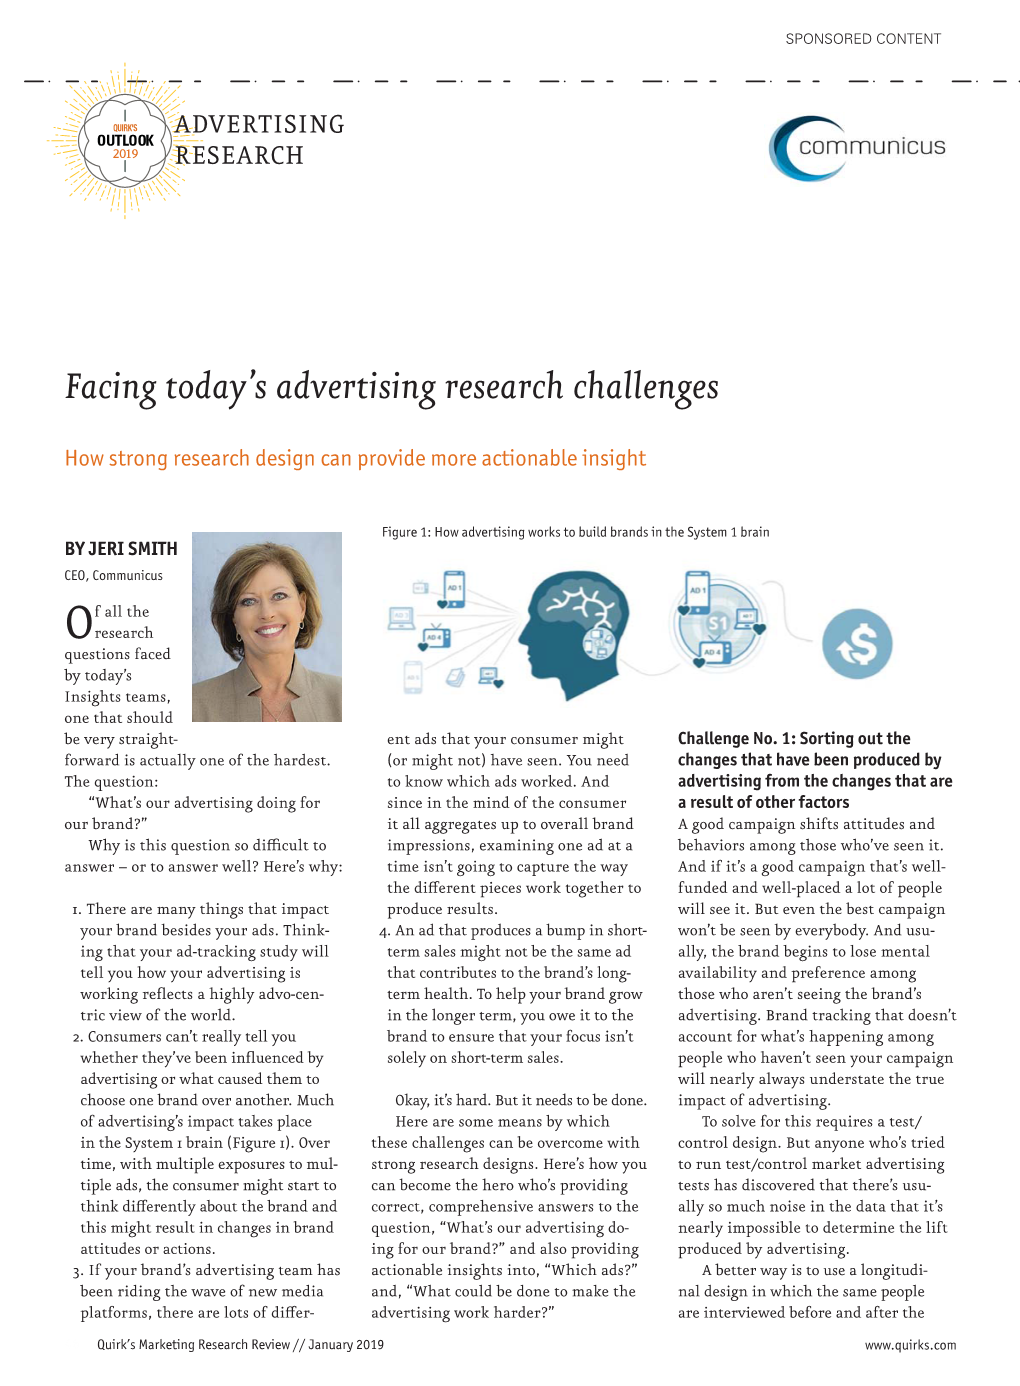 Facing Today's Advertising Research Challenges